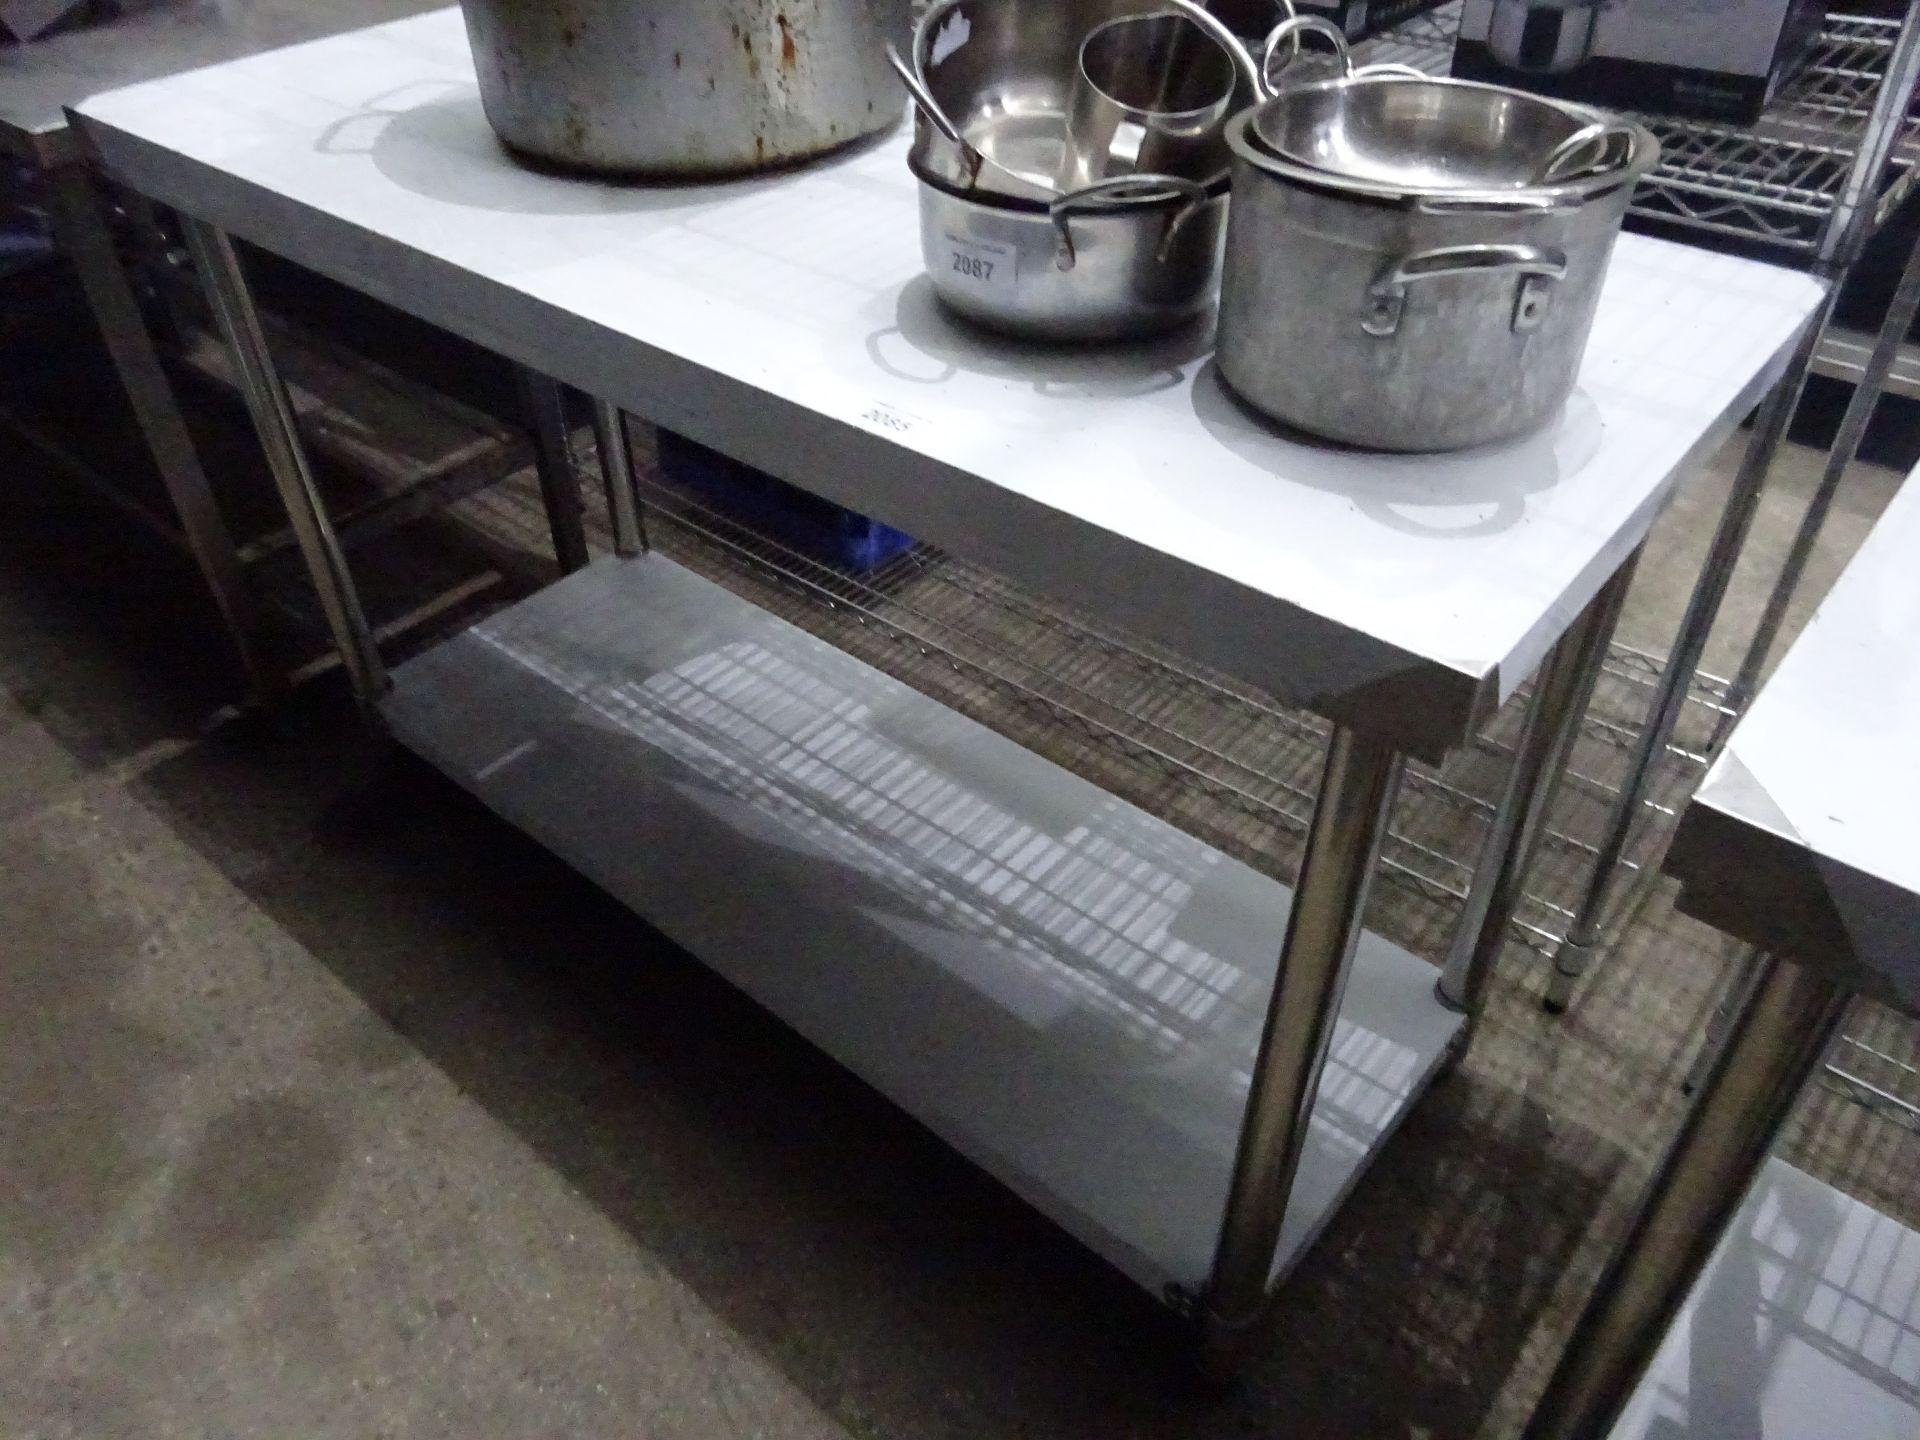 New stainless steel prep table with under shelf, 150cms.